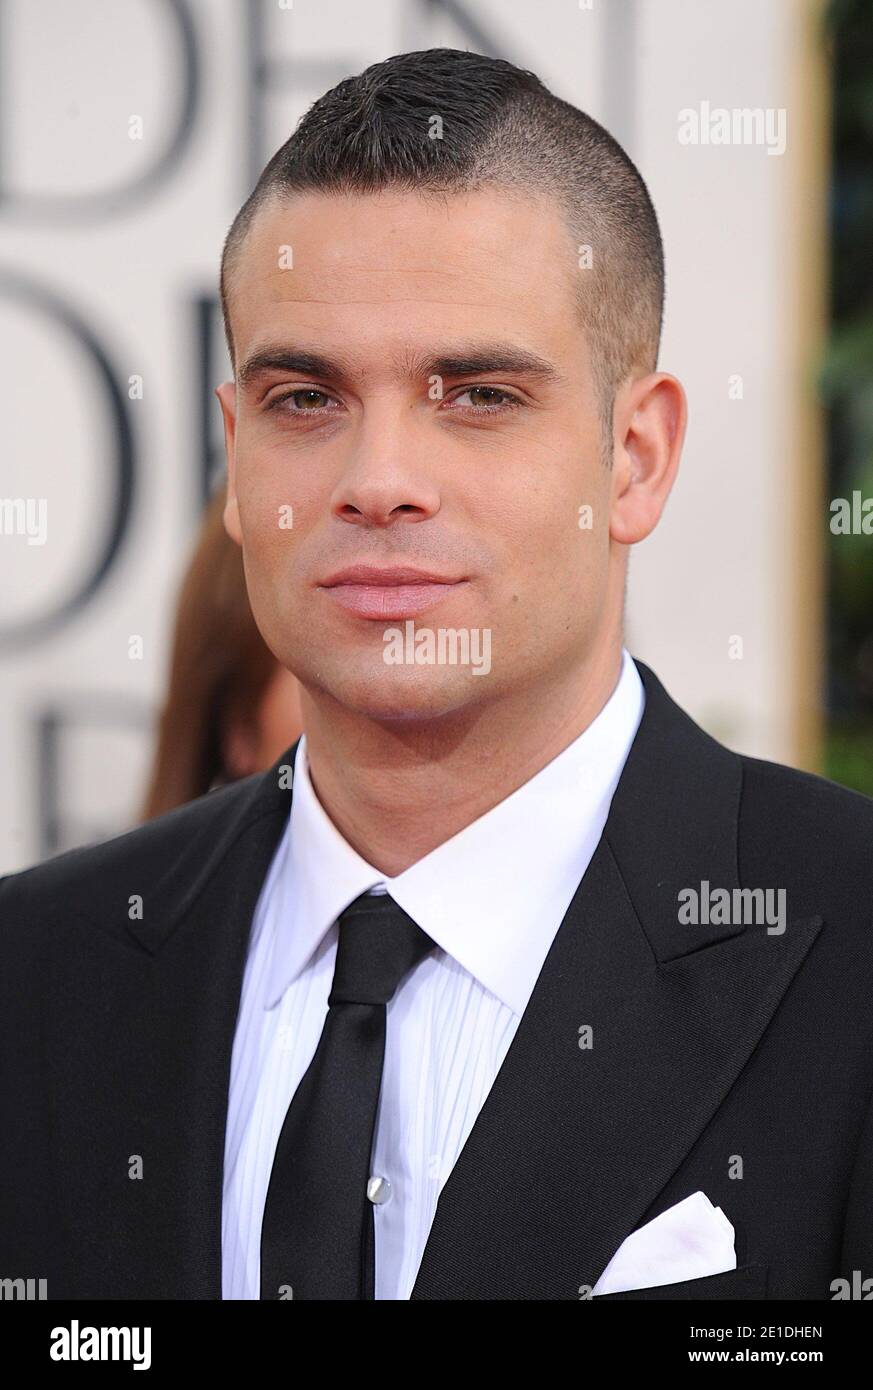 Mark Salling arriving for the 68th Annual Golden Globe Awards ceremony, held at the Beverly Hilton Hotel in Los Angeles, CA, USA on January 16, 2011. Photo by Lionel Hahn/ABACAUSA.COM Stock Photo